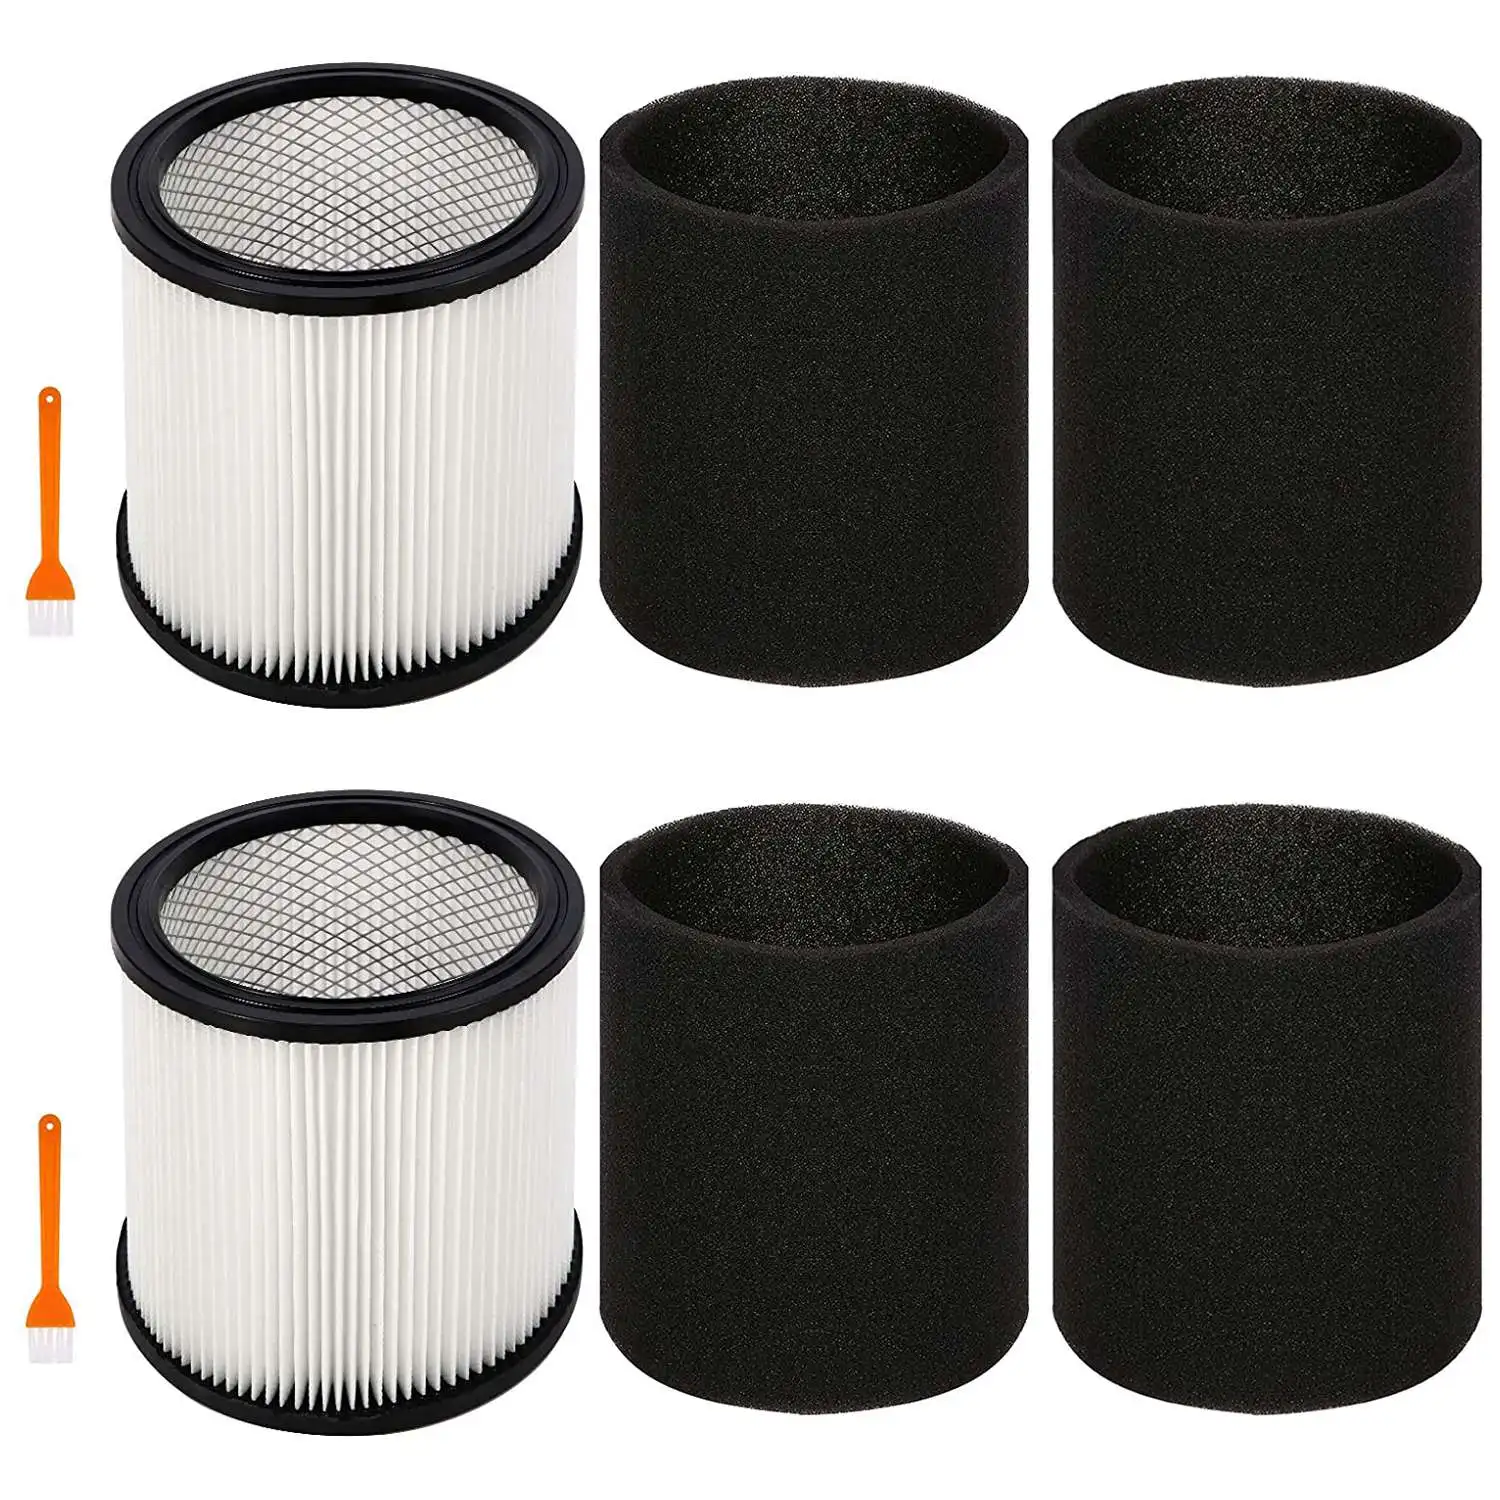 

Replacement Filter Cartridge for Shop Vac 90304 90350 90333 Fits Wet/Dry Vacuum Cleaners 5 Gallon and Above